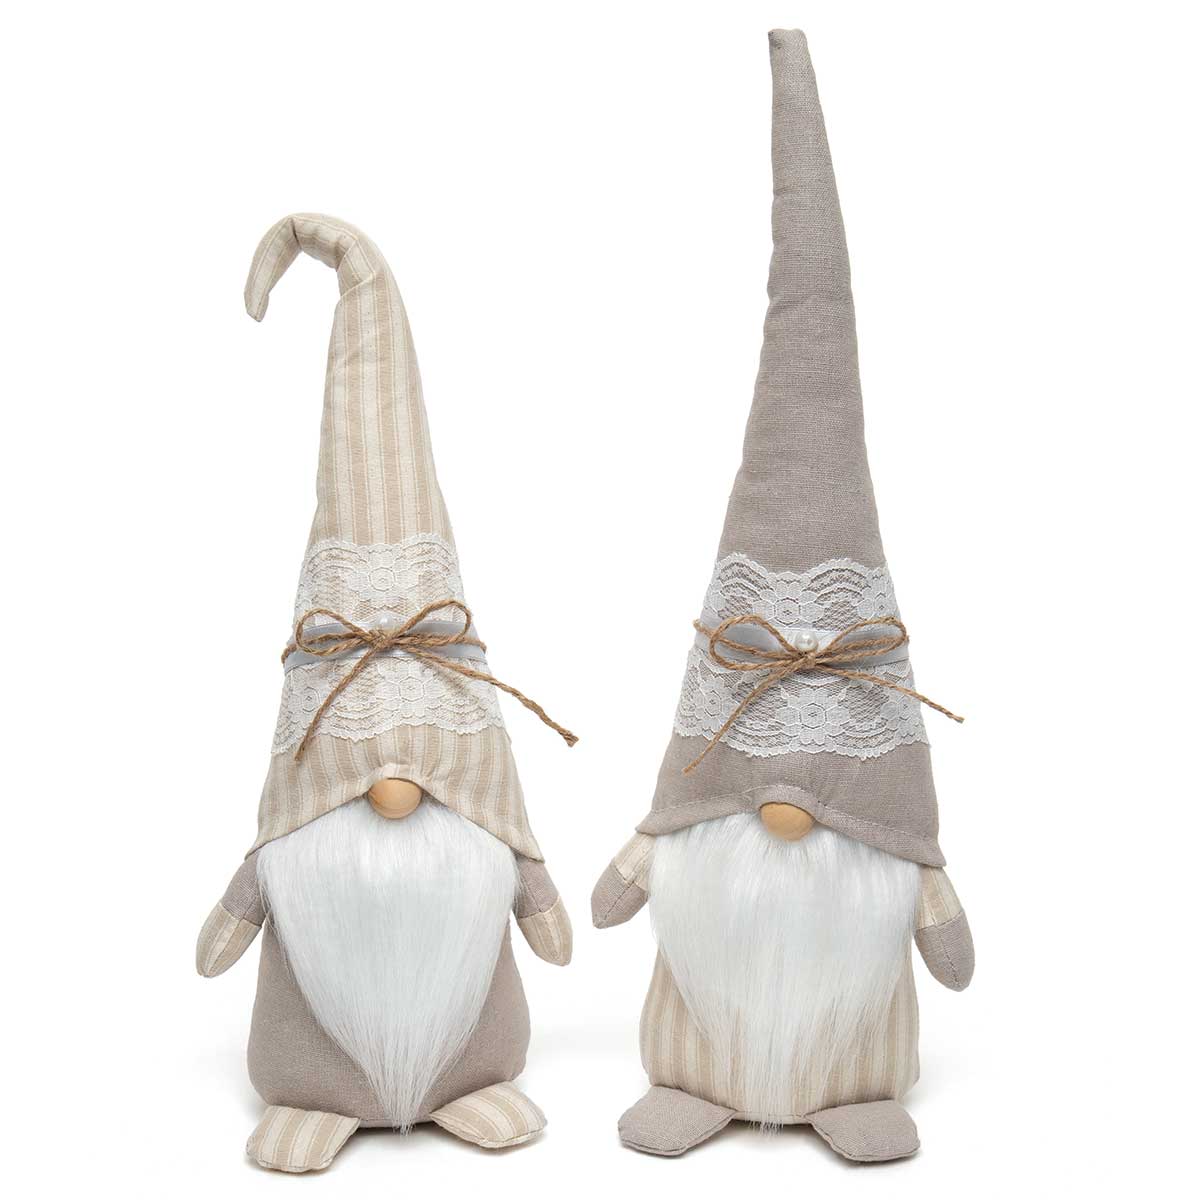 !VINTAGE LACE GNOME BEIGE/CREAM/GREY WITH SOLID/STIPE